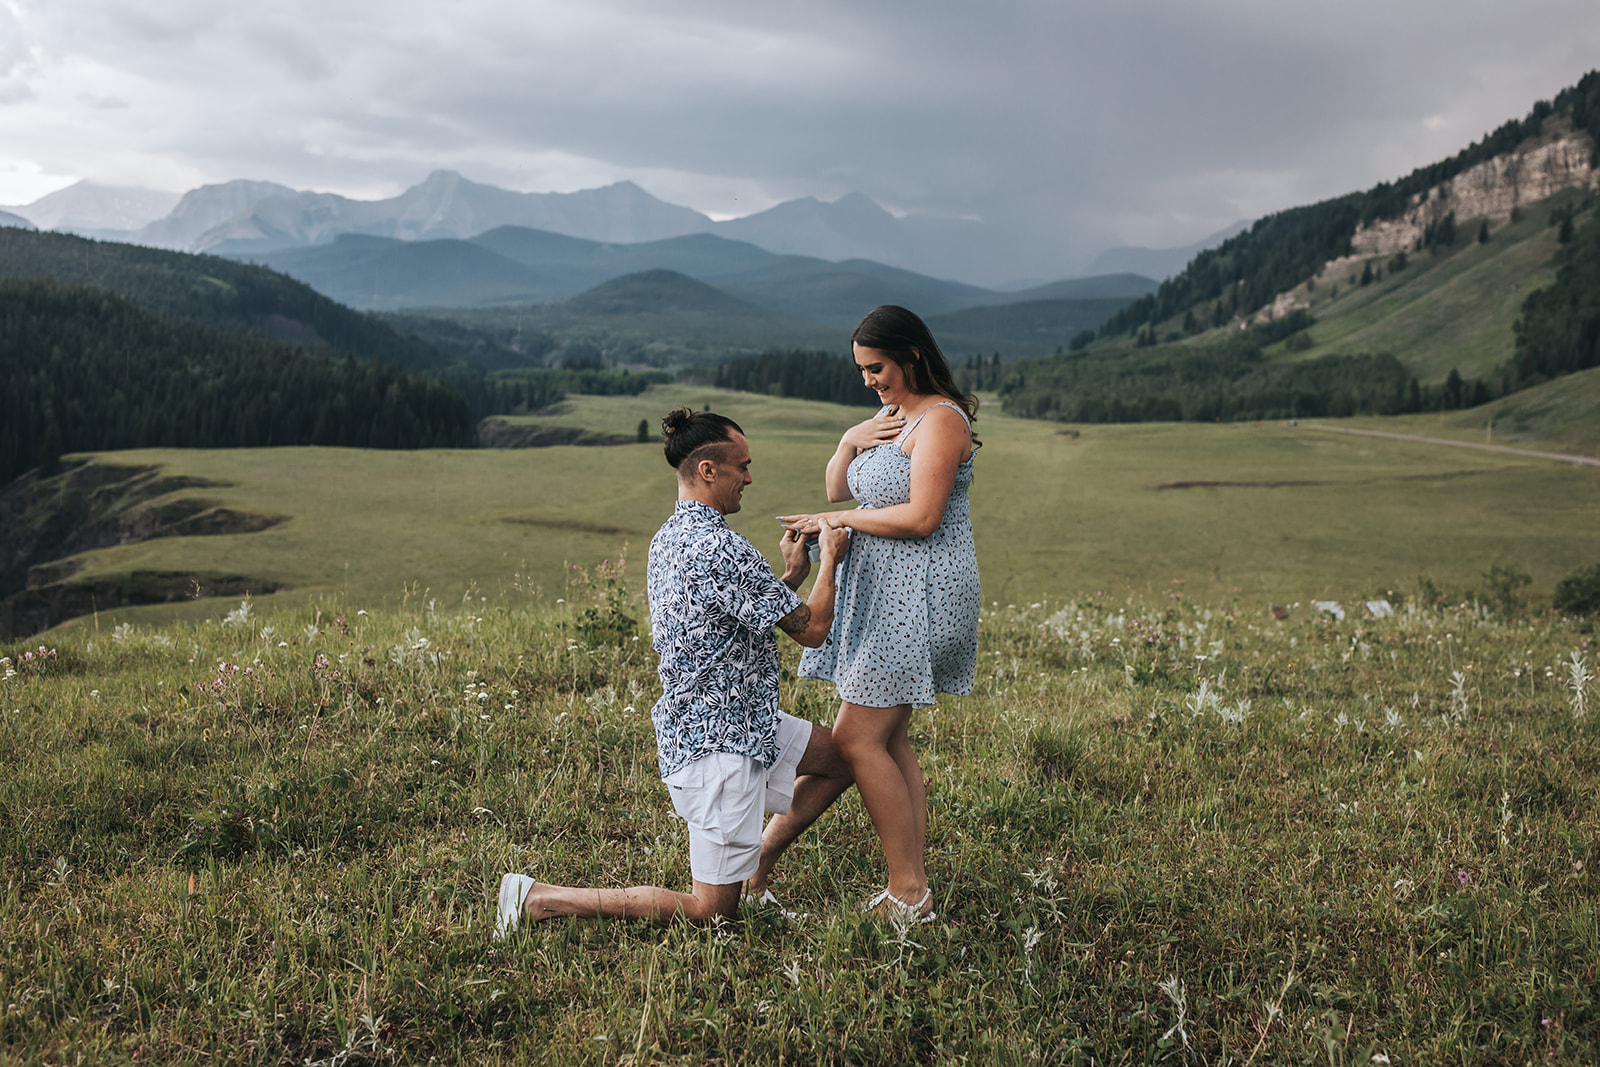 Joel's Surprise Proposal to Chera: A Magical Moment Captured Forever